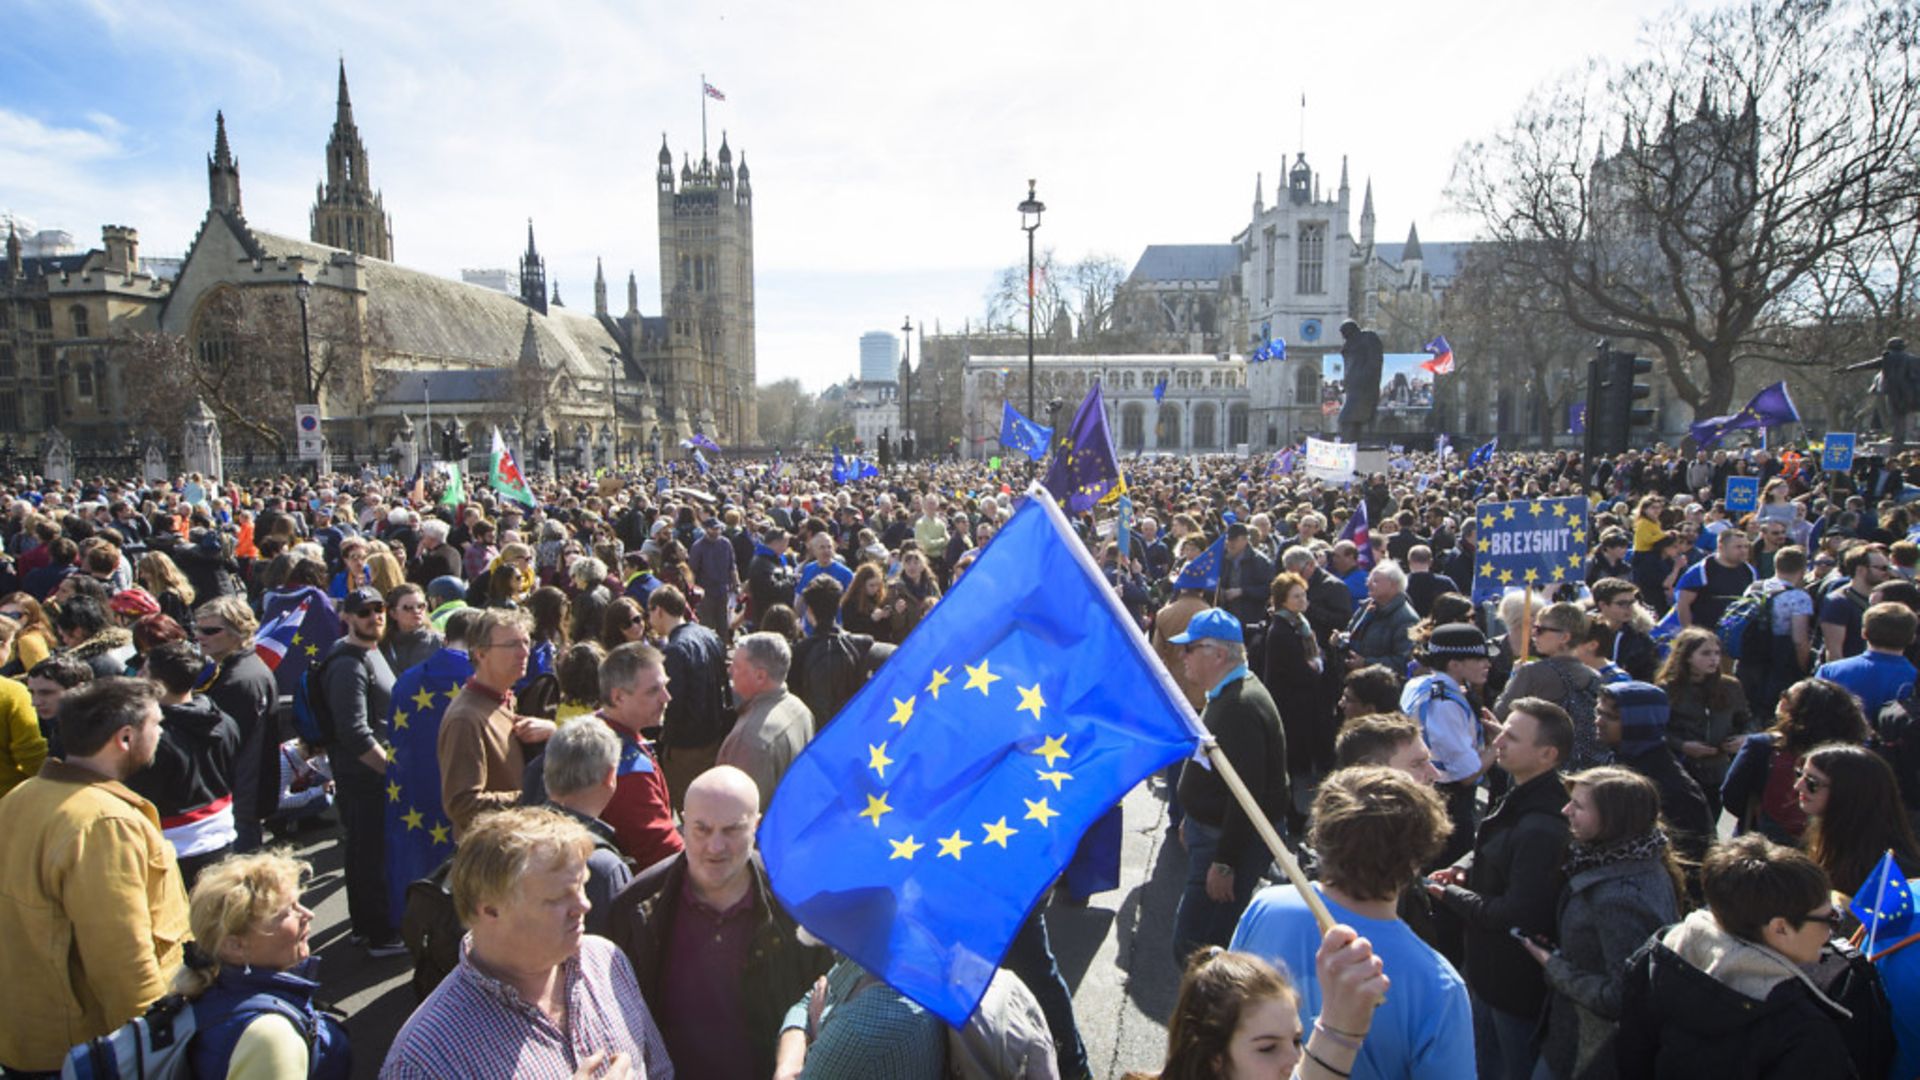 Remainers at a March for Europe event after the EU referendum result - Credit: Empics Entertainment